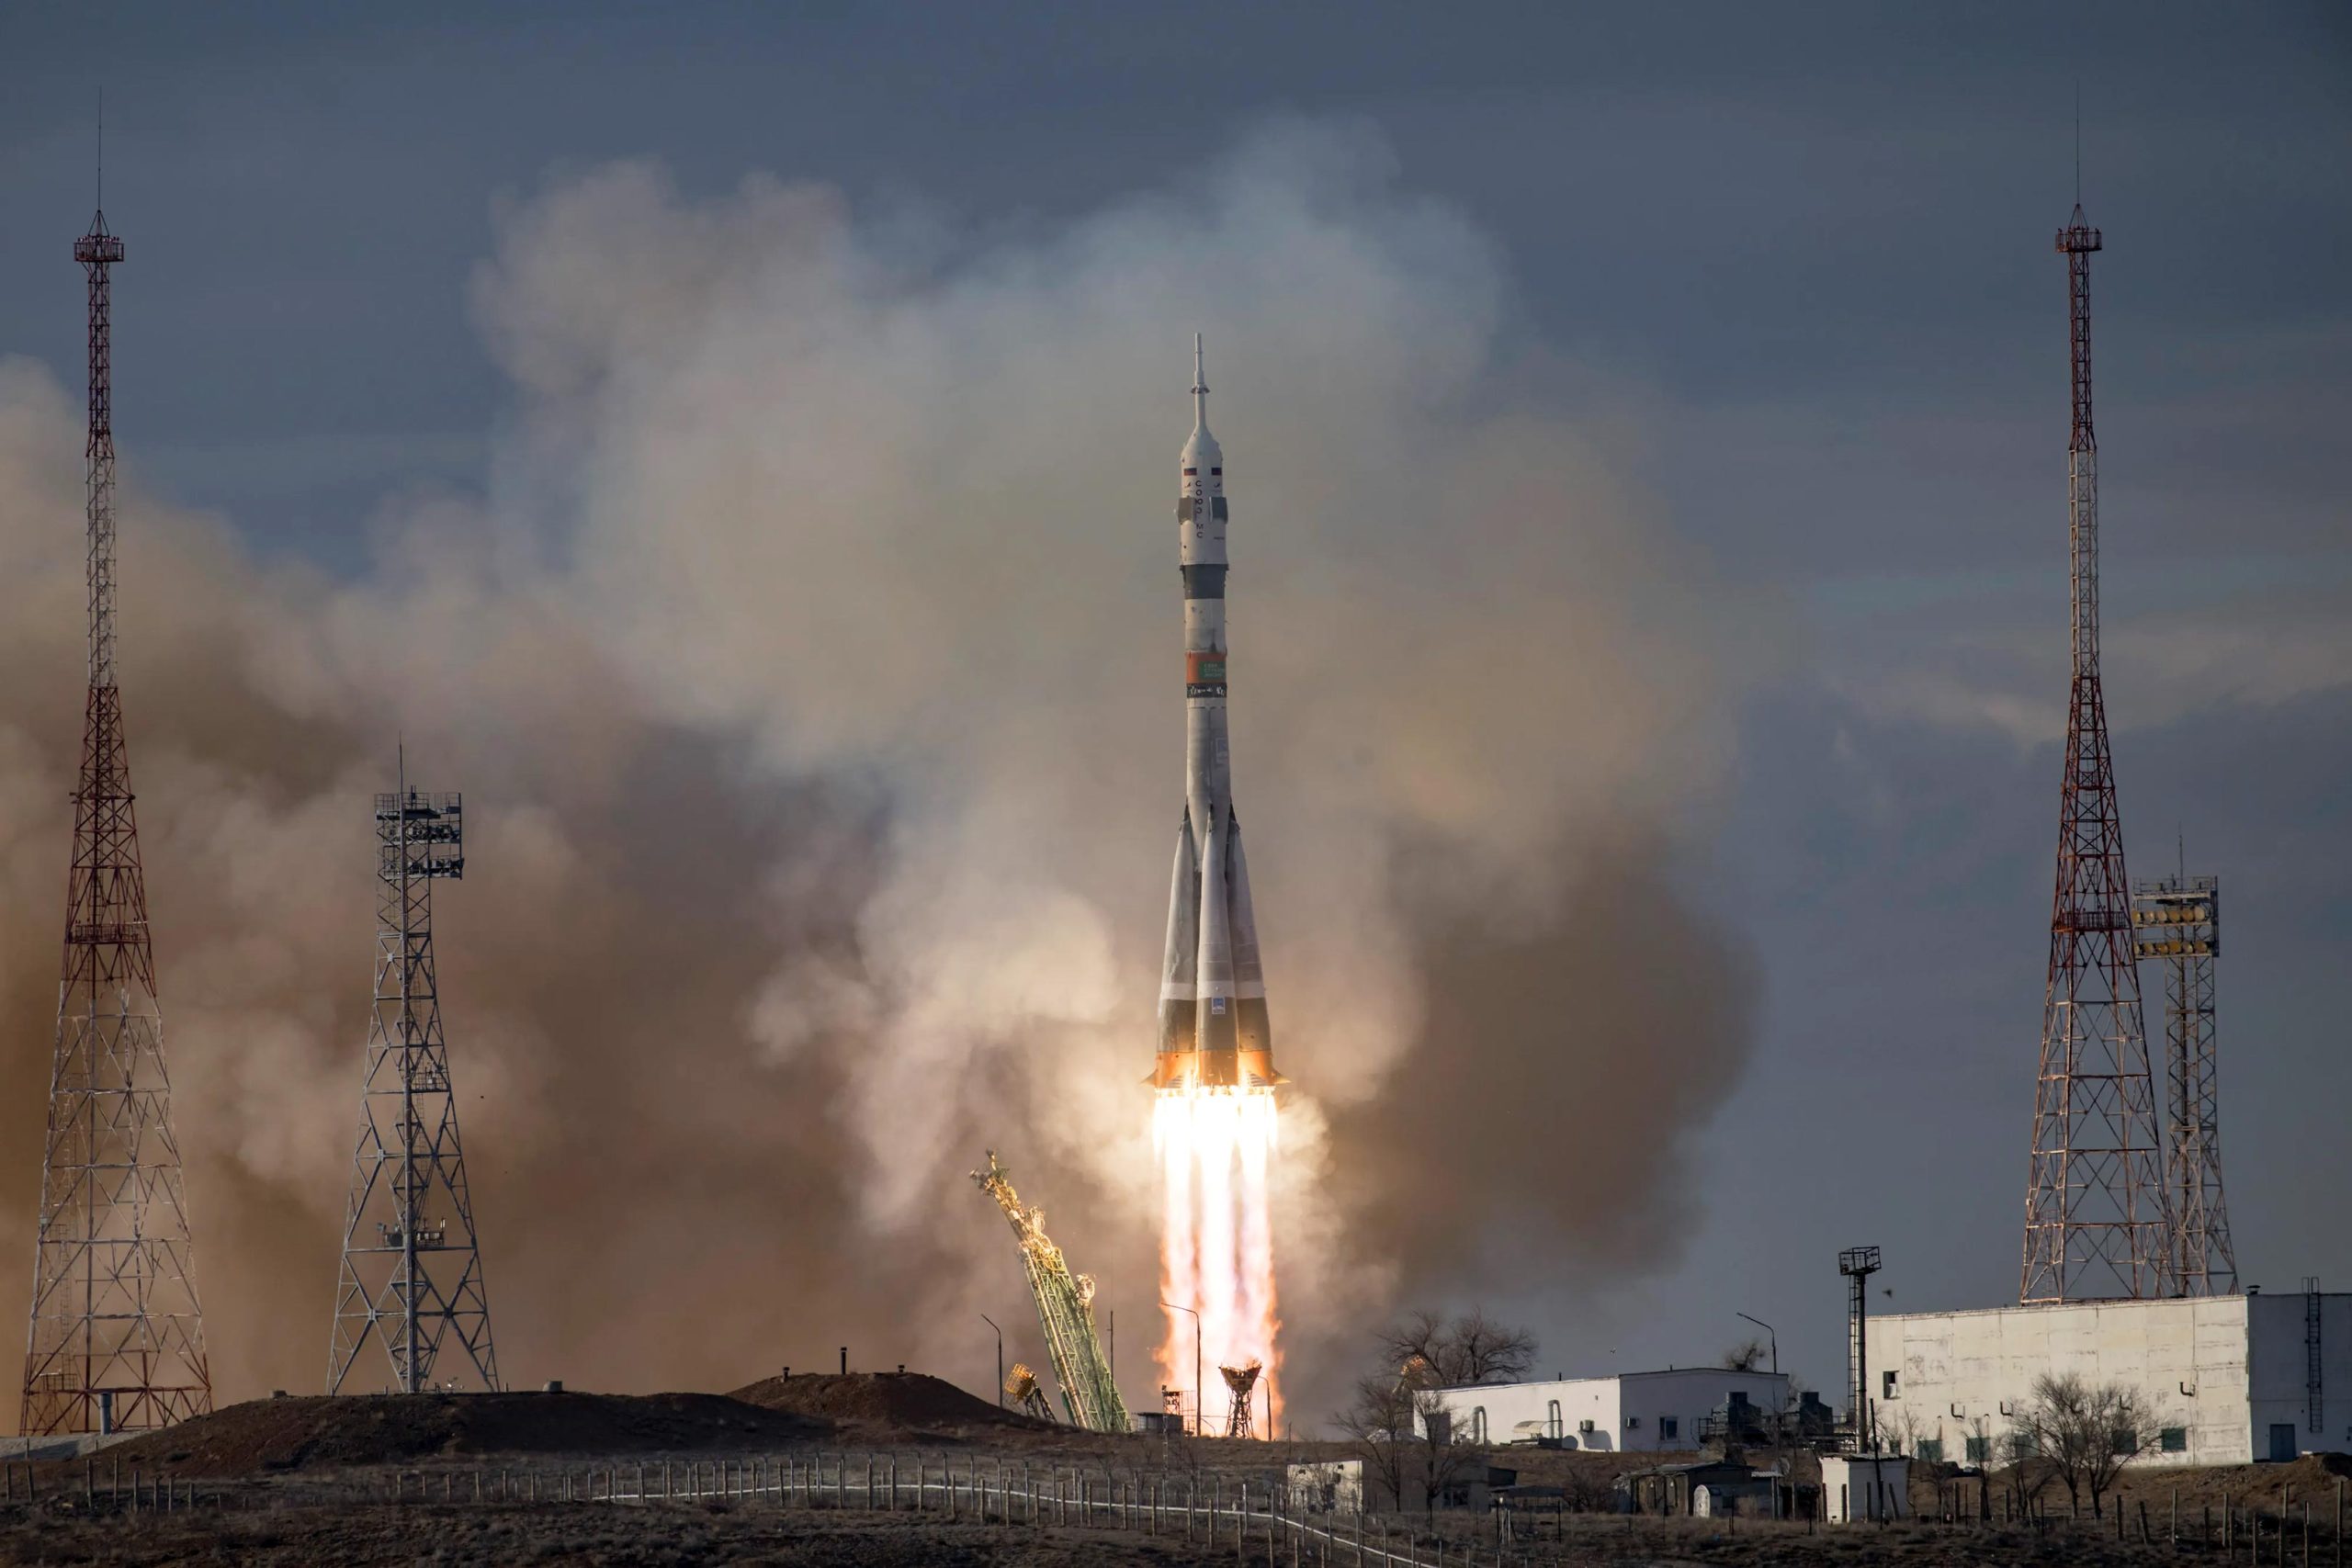 A Russian rocket sends an astronaut, astronaut and flight attendant to the International Space Station, days after a malfunction